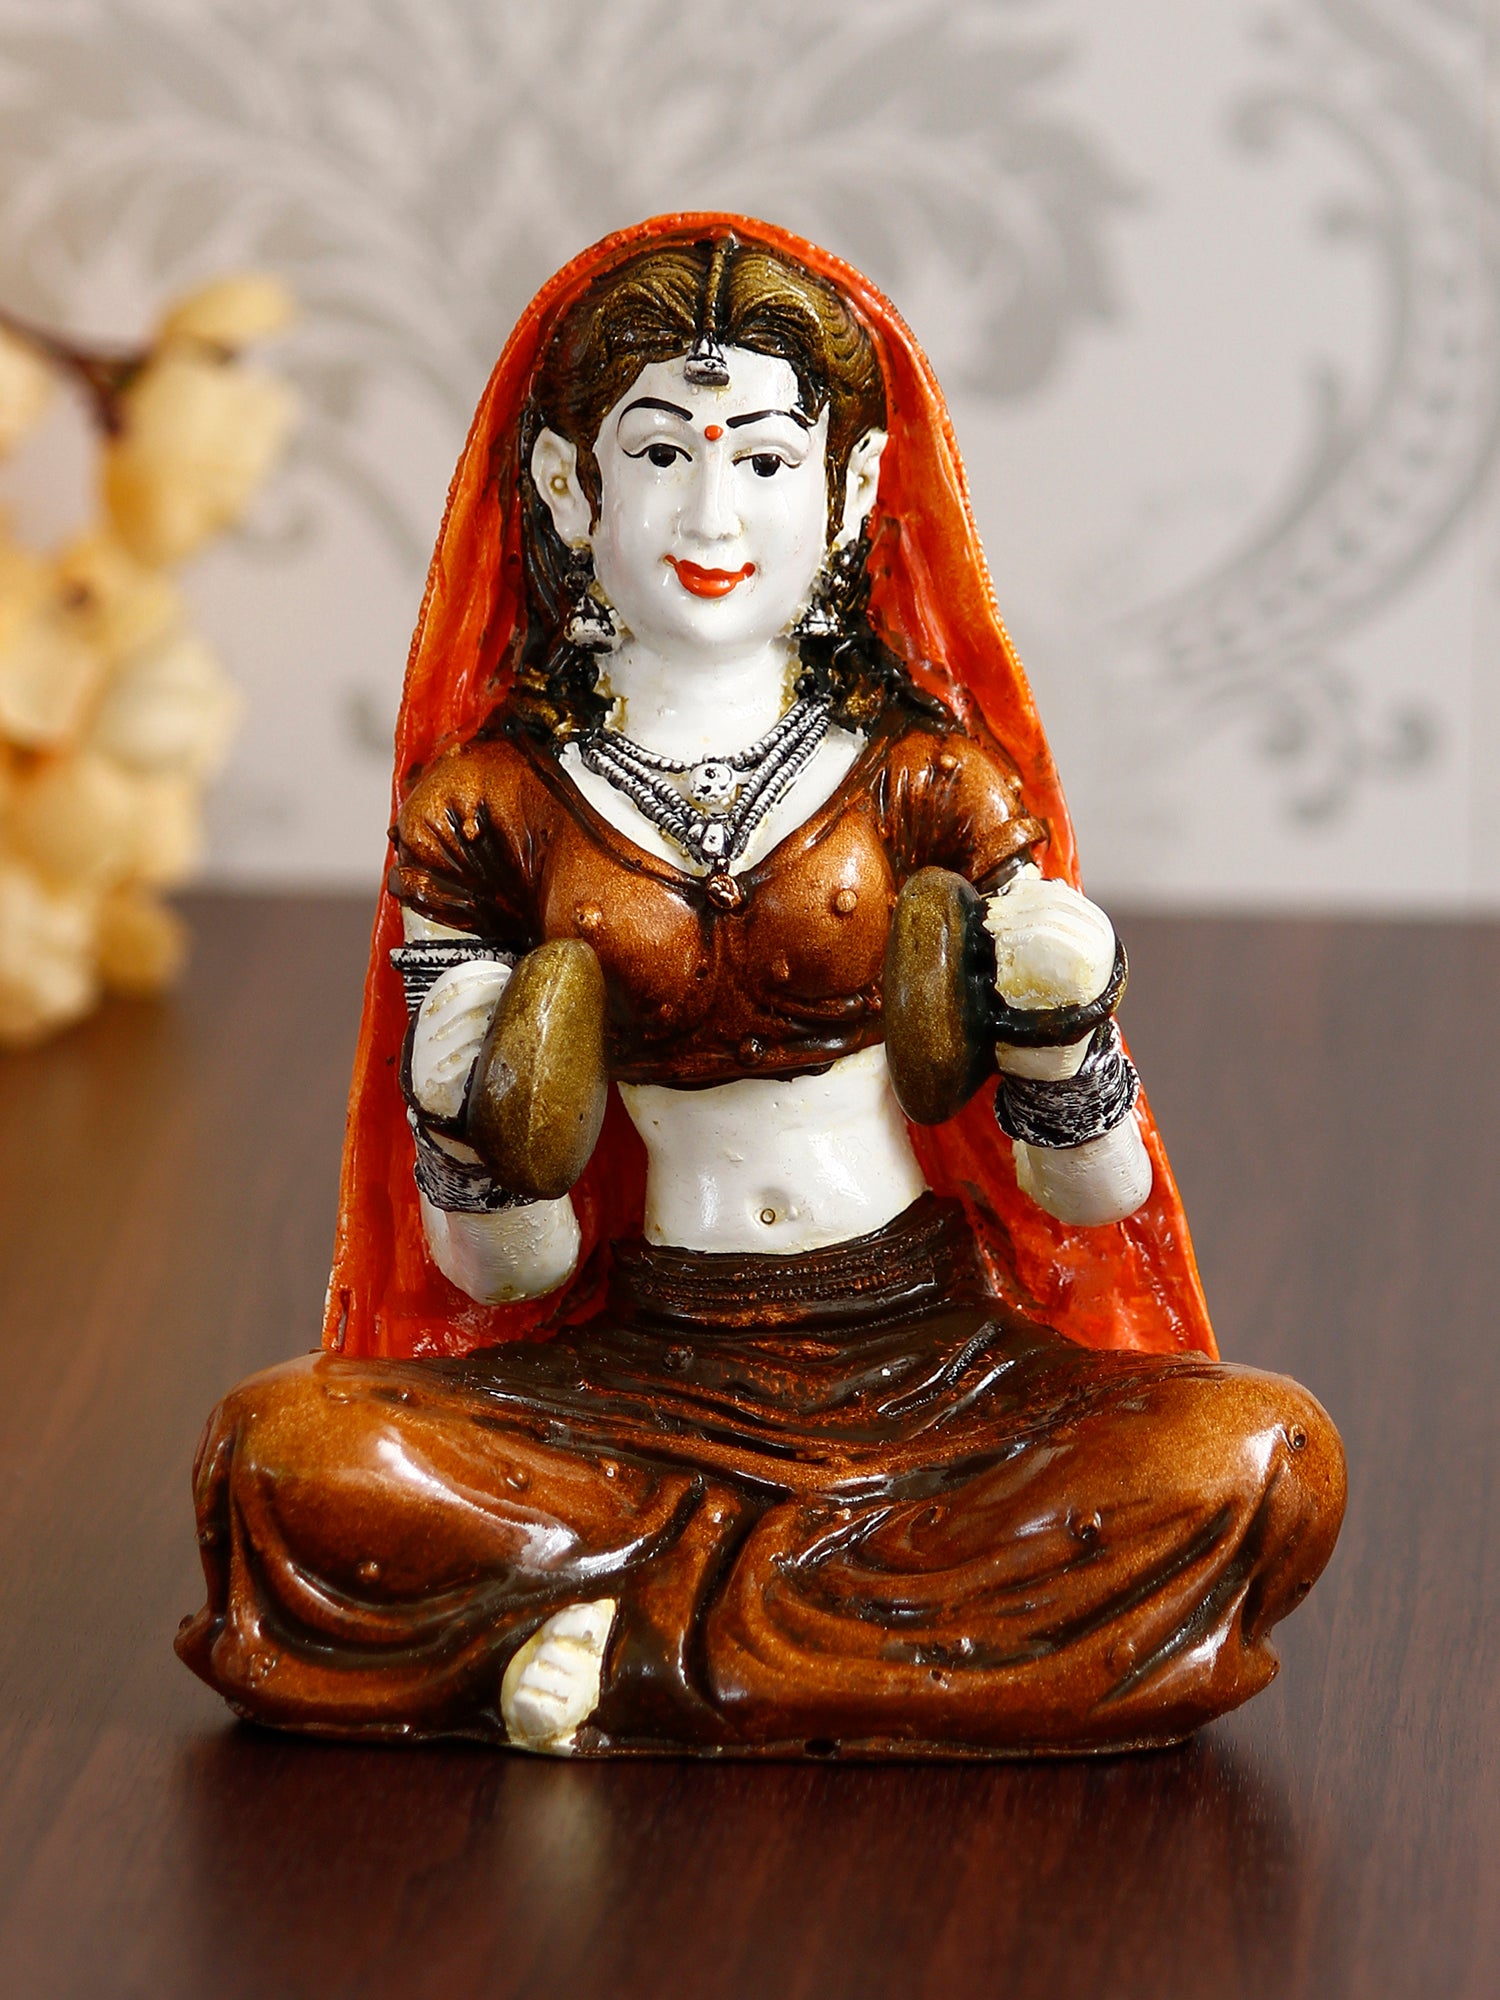 Polyresin Rajasthani Women Statue Playing Hand Cymbals Decorative Human Figurines Home Decor Showpiece 1